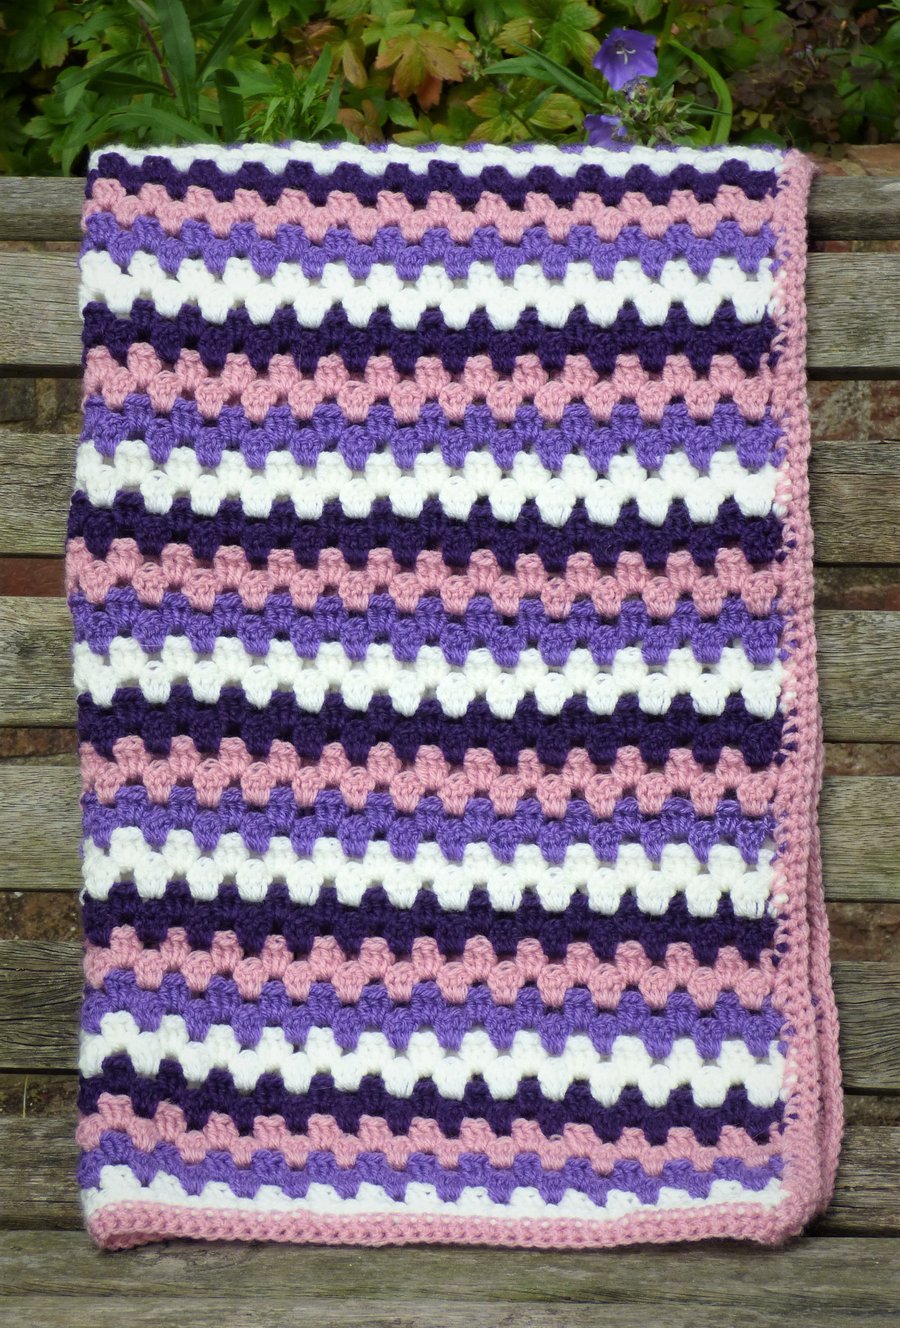 Practically perfect baby blanket